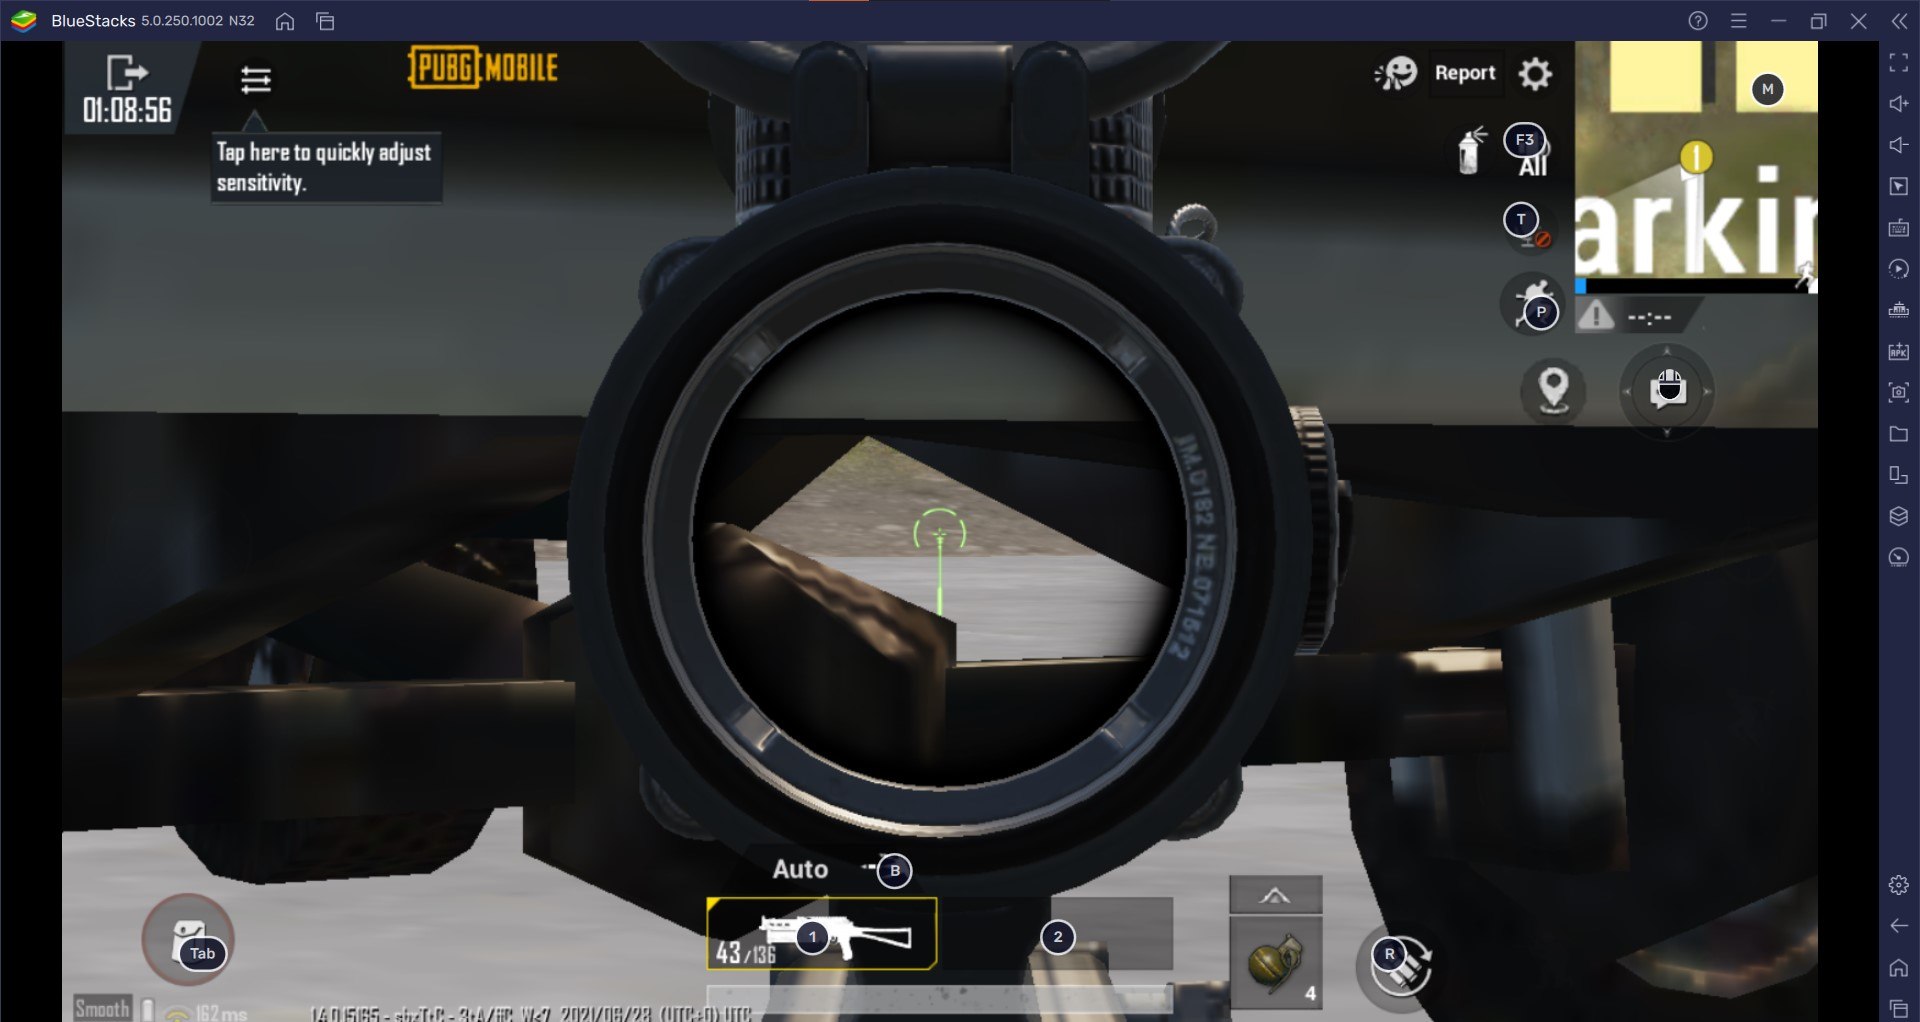 PUBG Mobile: BlueStacks Guide to Top 5 Mistakes Players Make